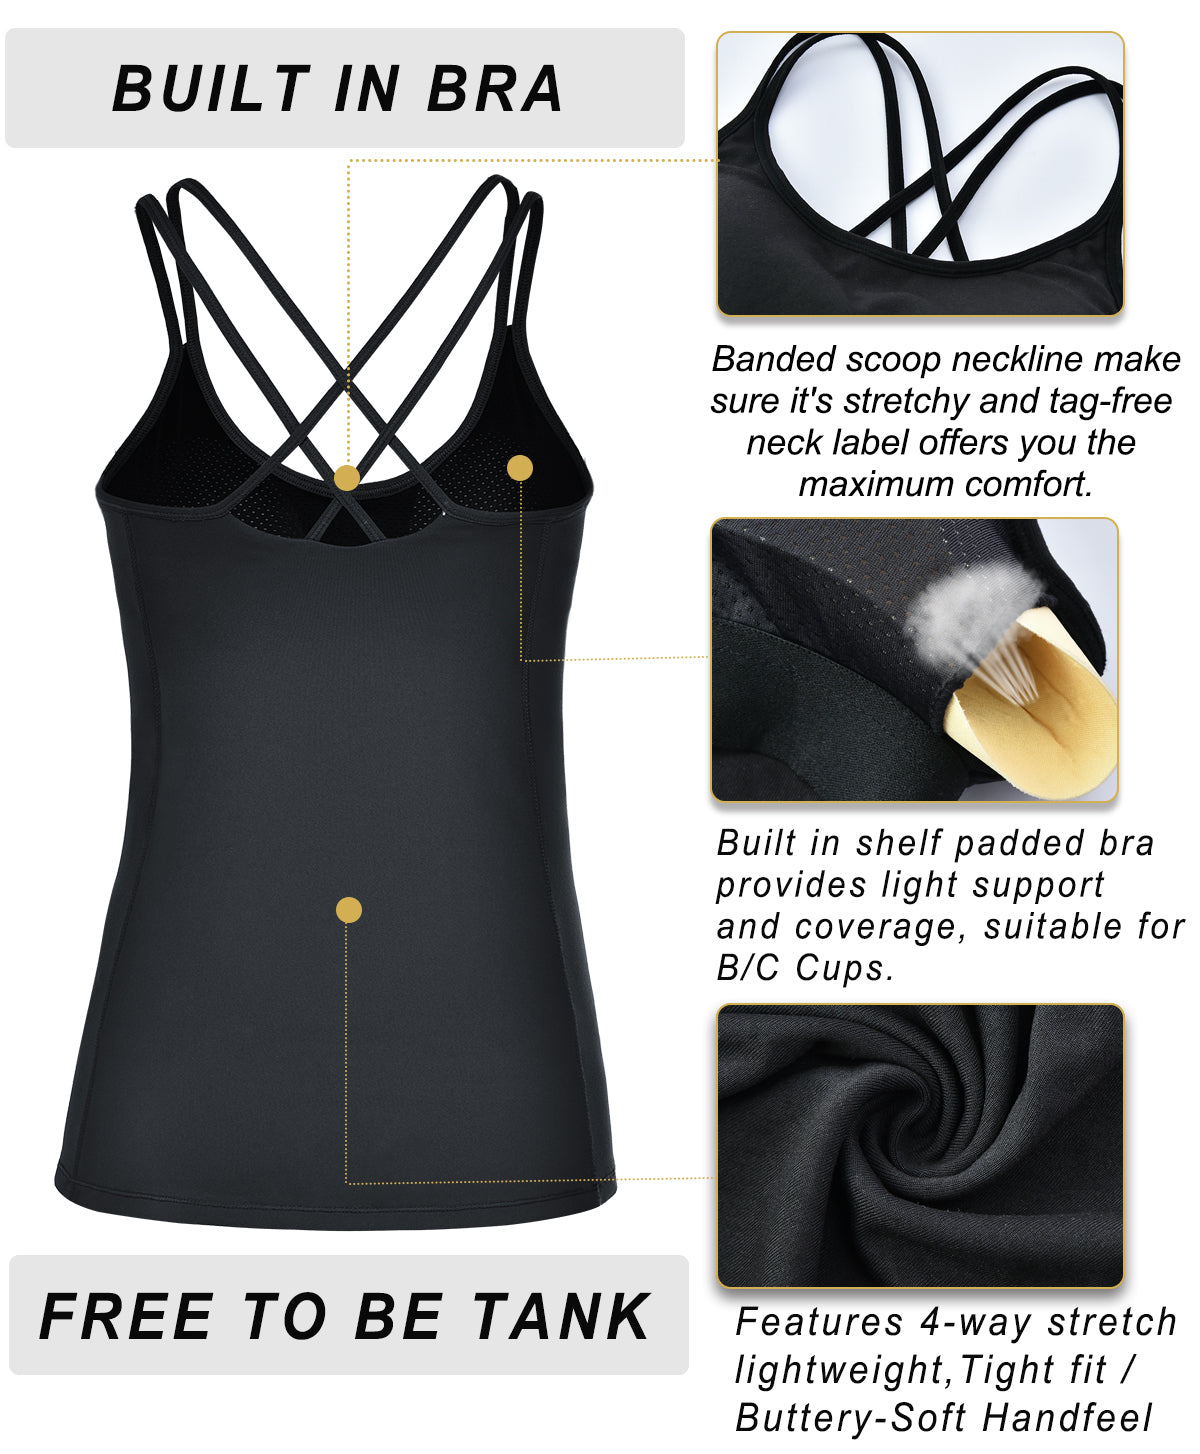 Women's Stretchy Tank Tops With Built-in Shelf Bra. Available In